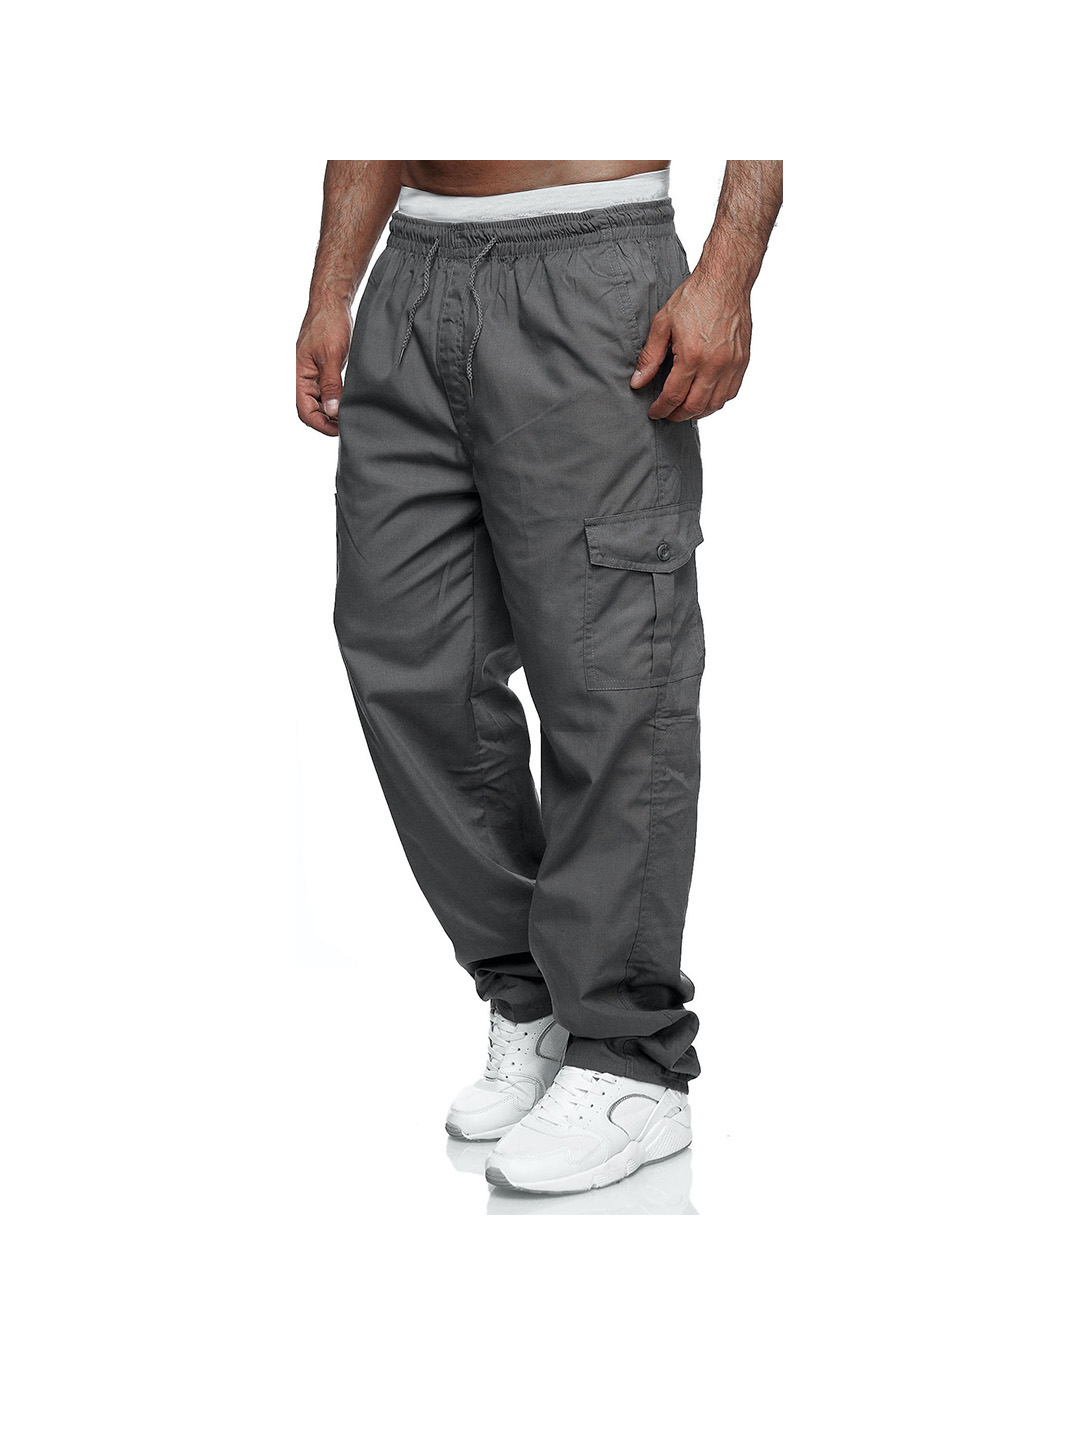 men's ebay casual multi-pocket loose straight overalls outdoor trousers fitness pants